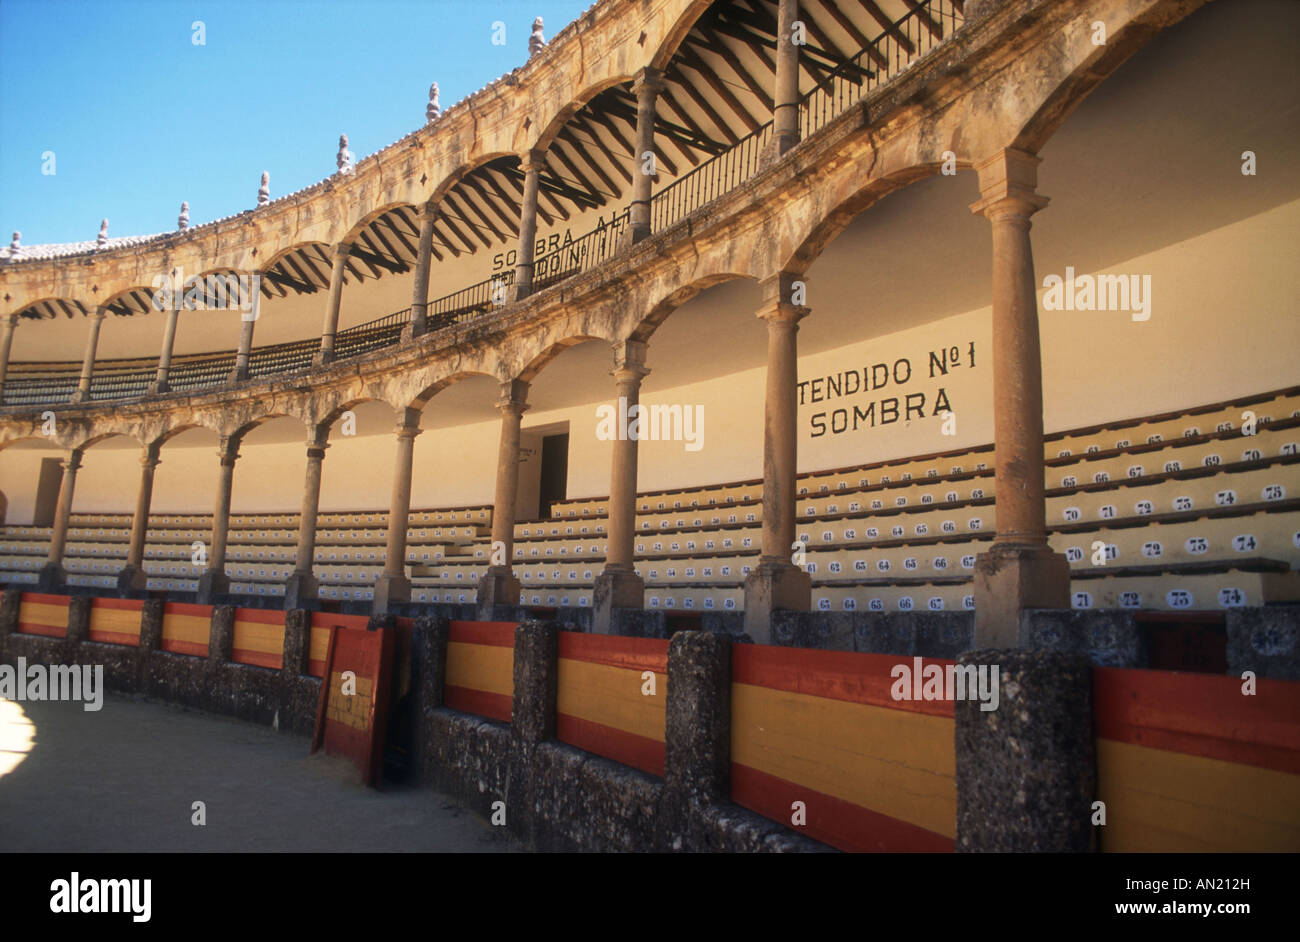 Interior of Bullring, Ronda, Andalucia, showing numbered seats. Stock Photo